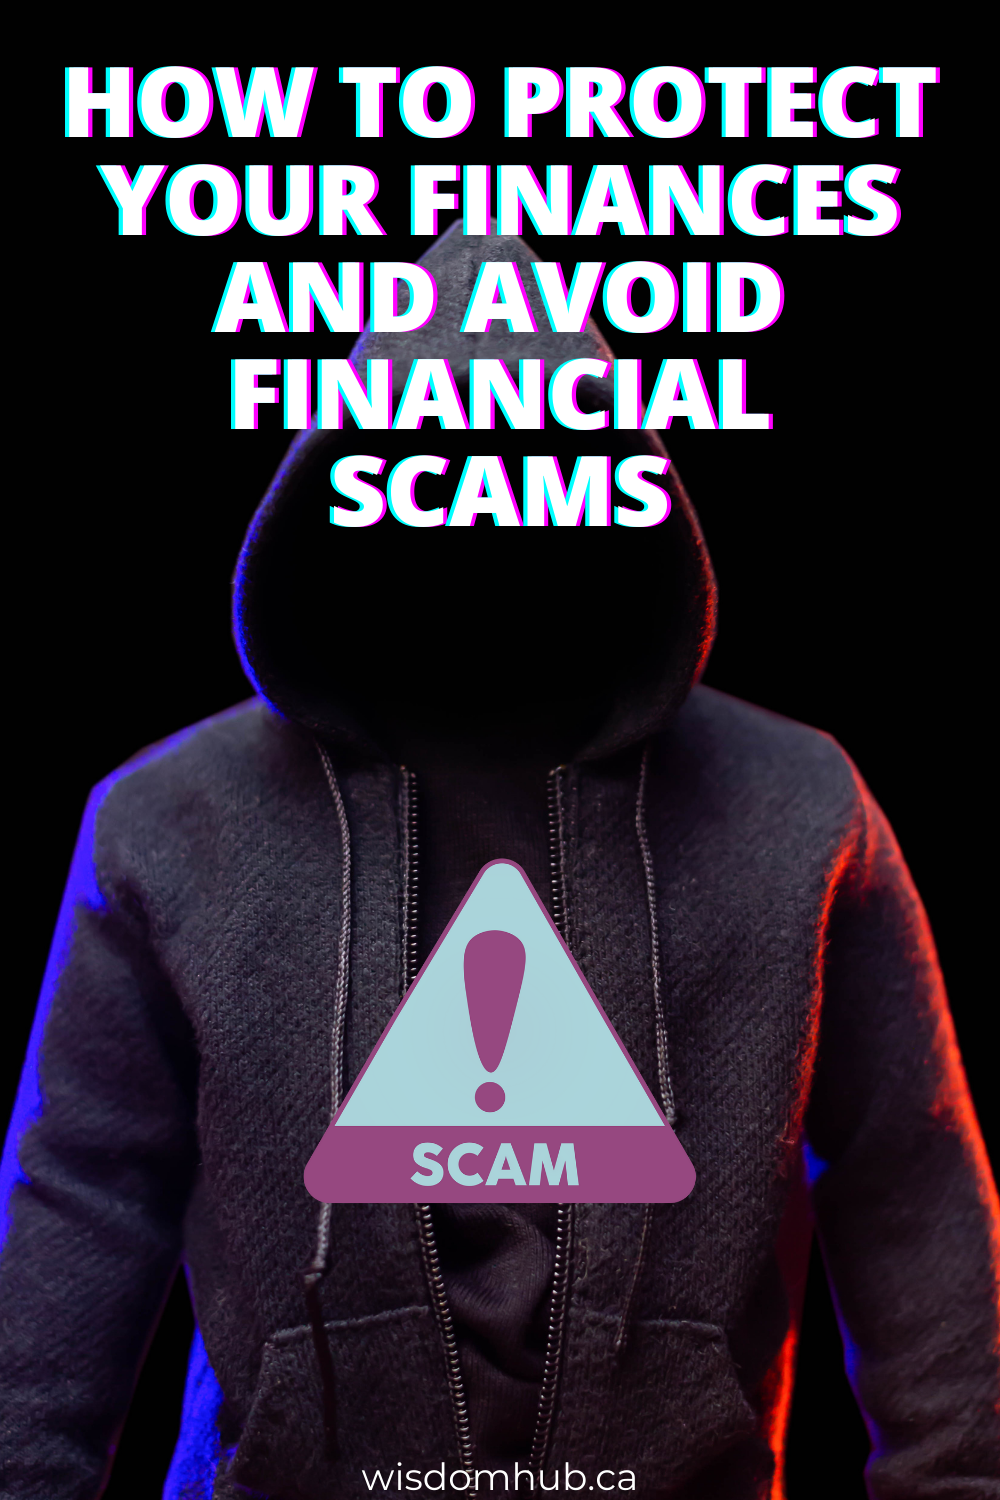 How To Protect Your Finances & Avoid Financial Scams